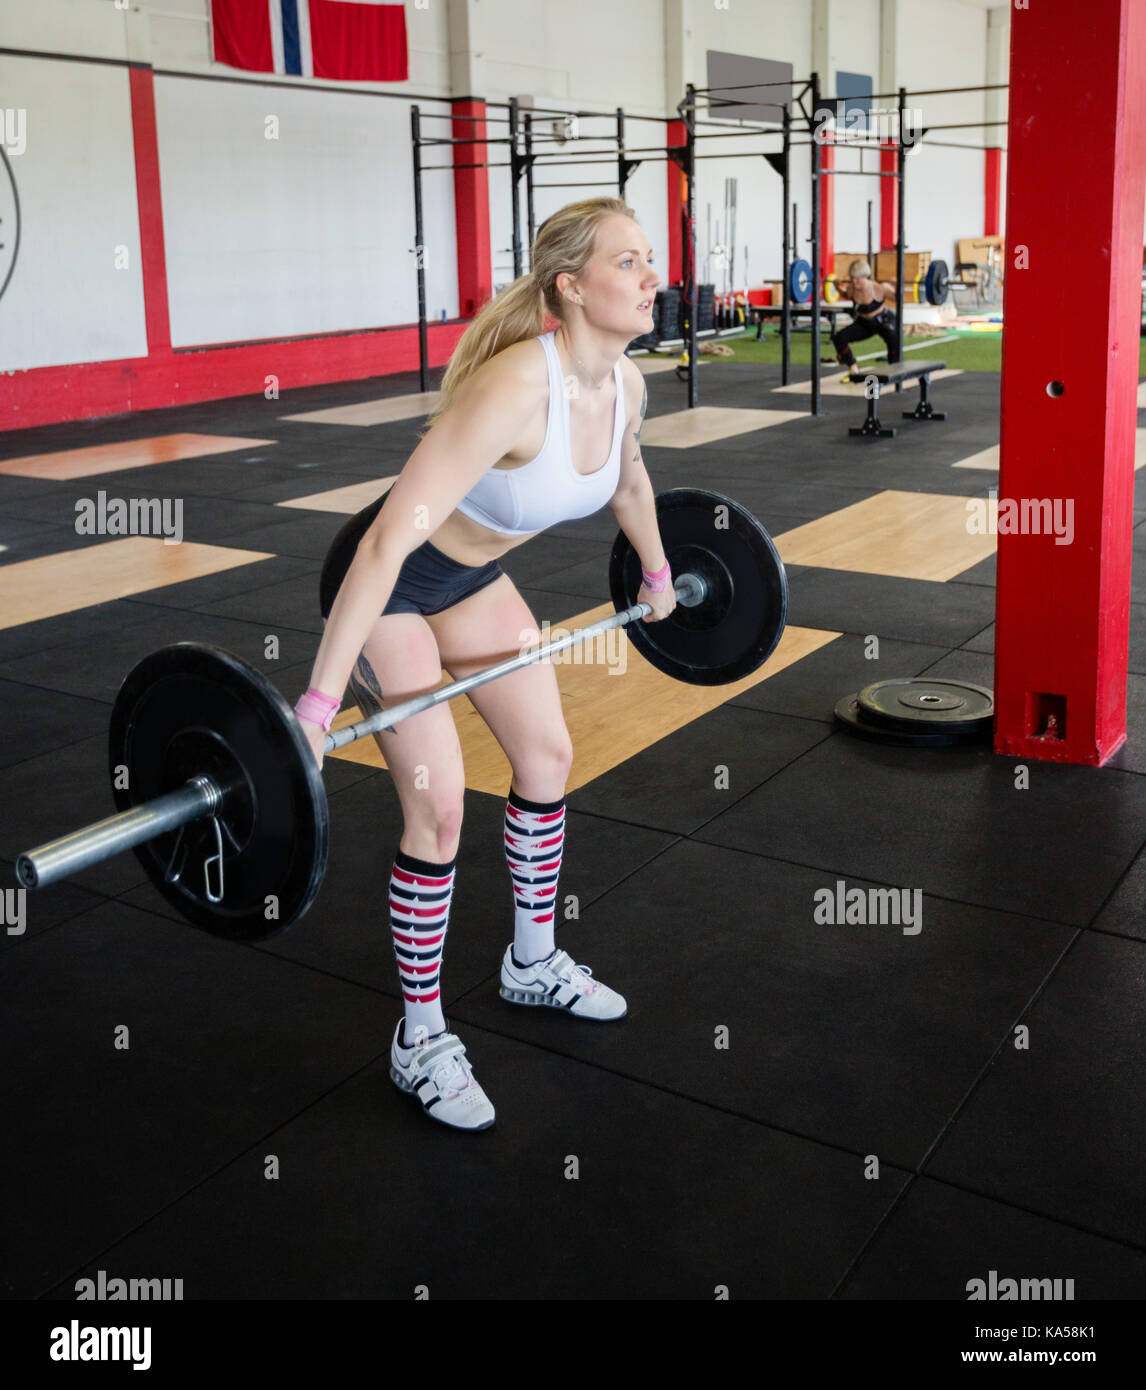 Woman In Sportswear Lifting Barbell In Fitness Center Stock Photo